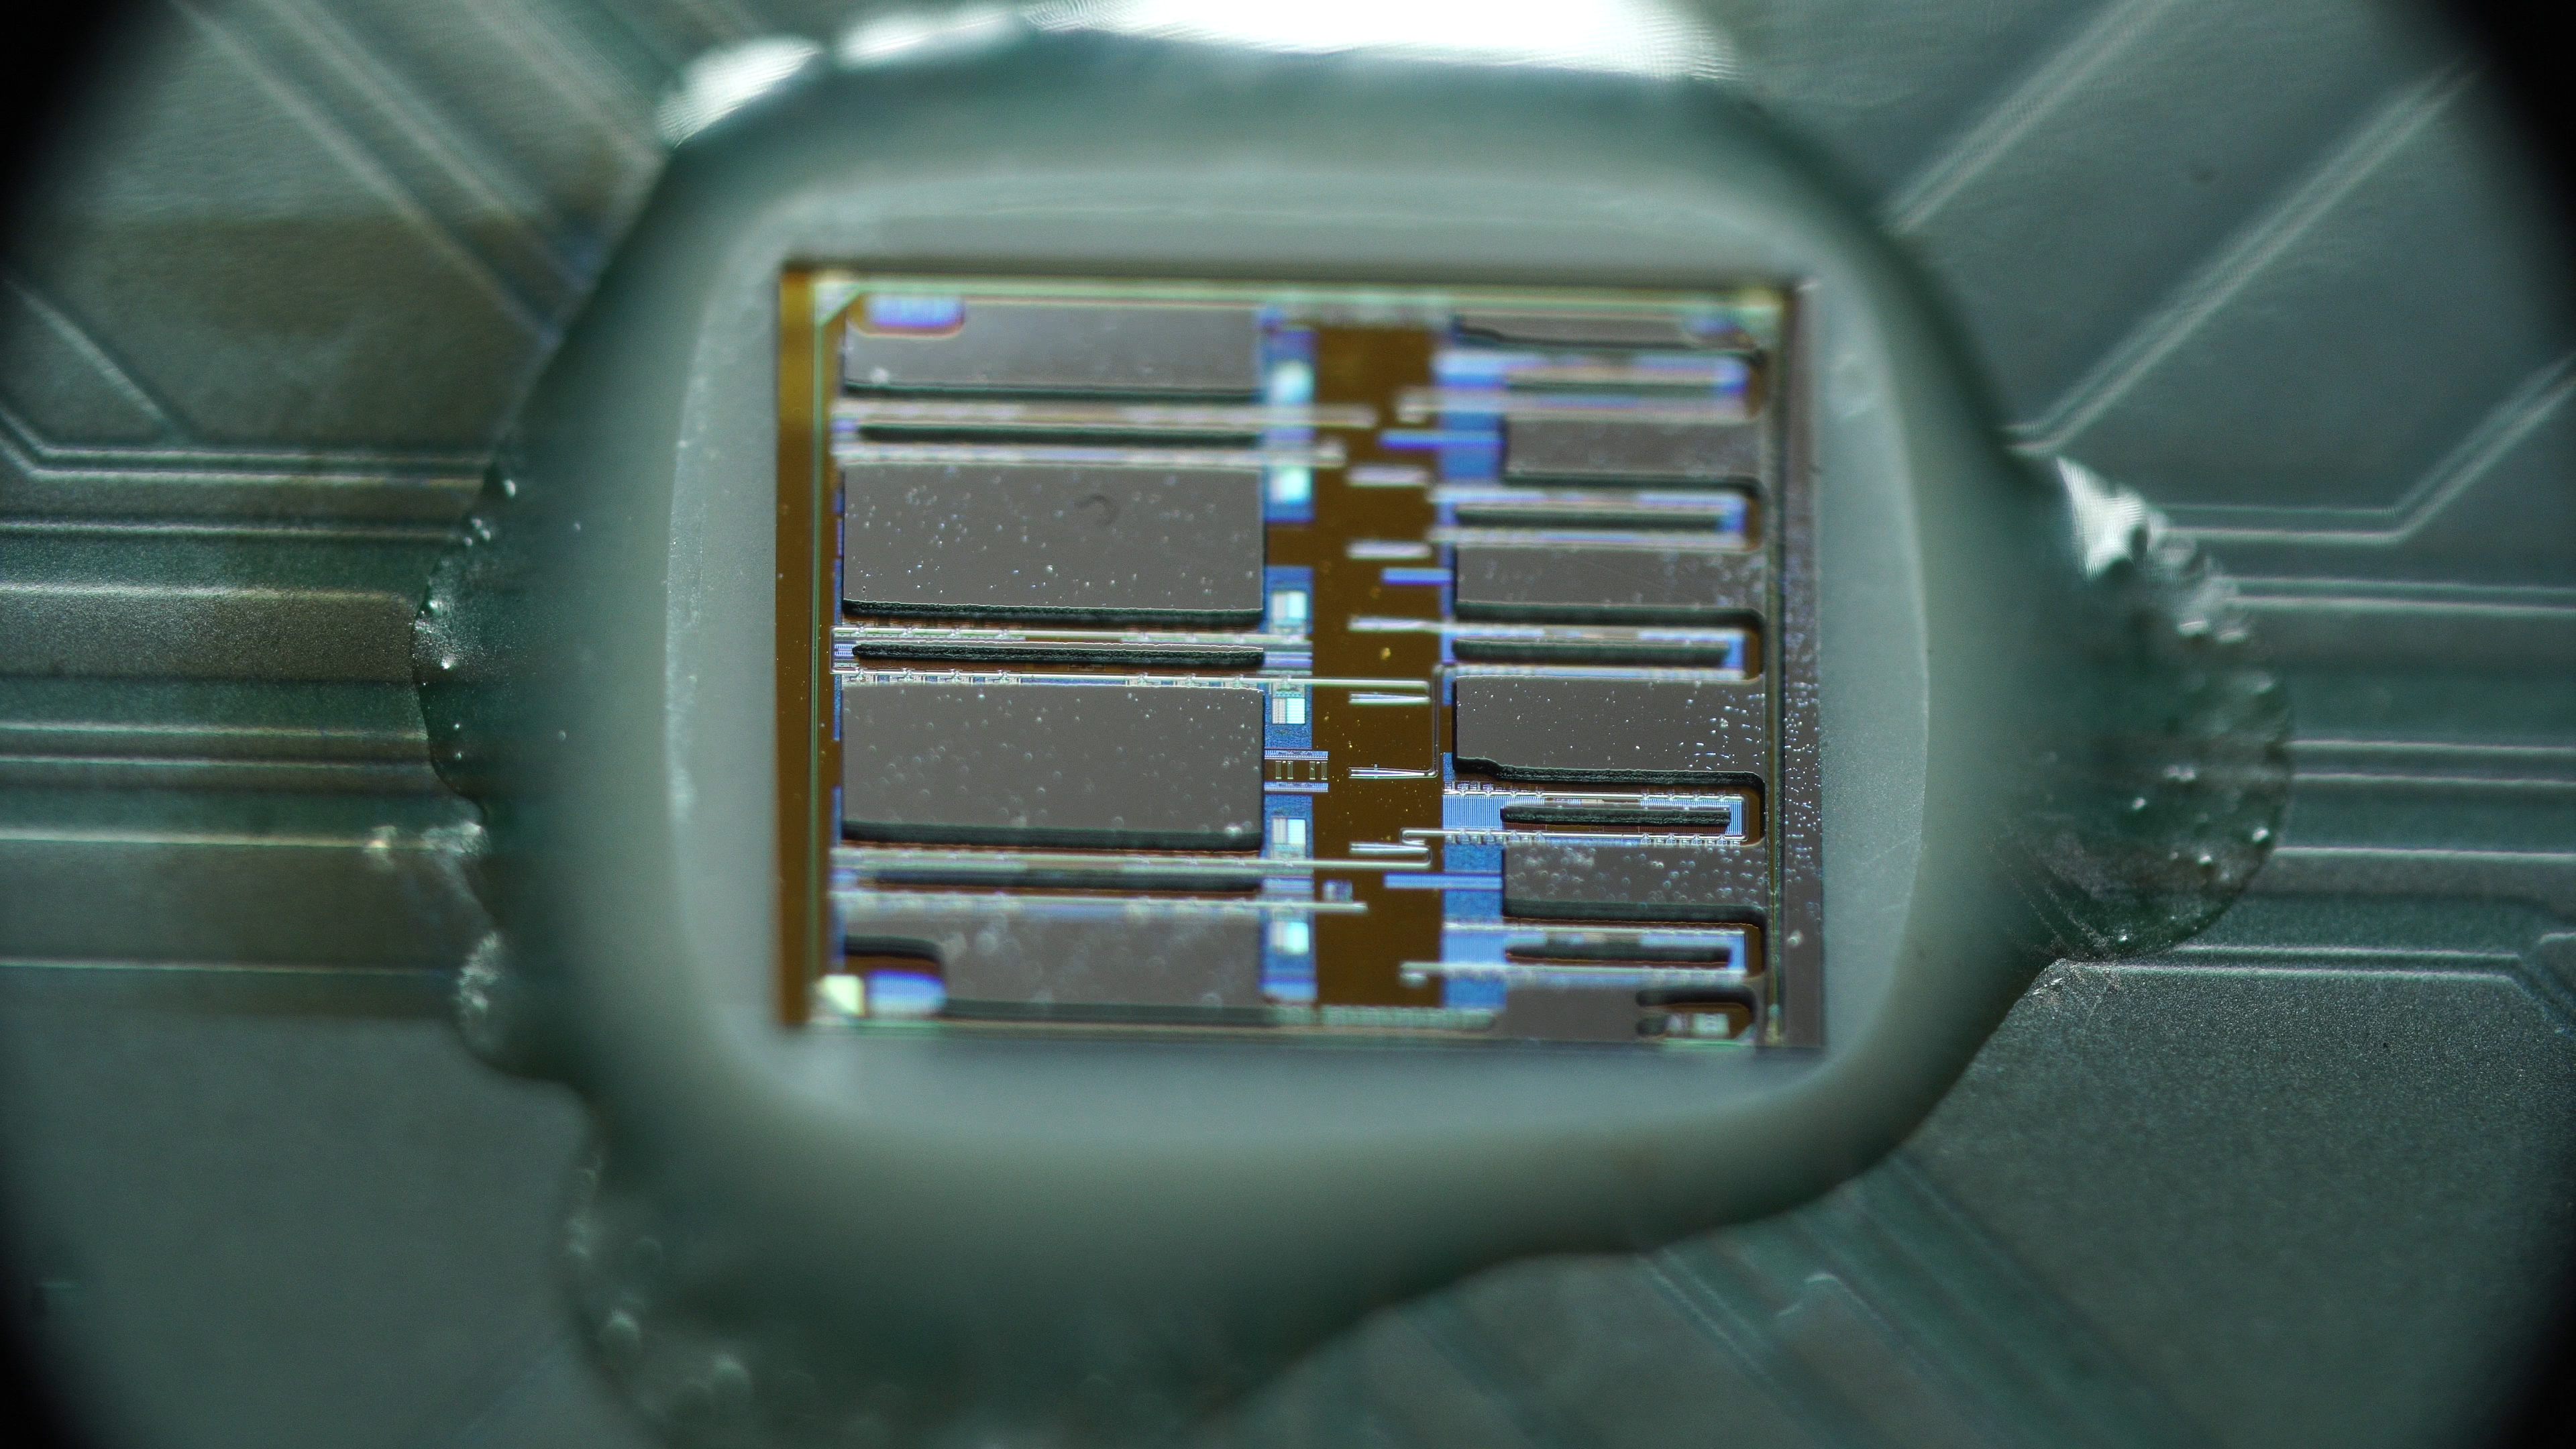 Photonic communication comes to computer chips